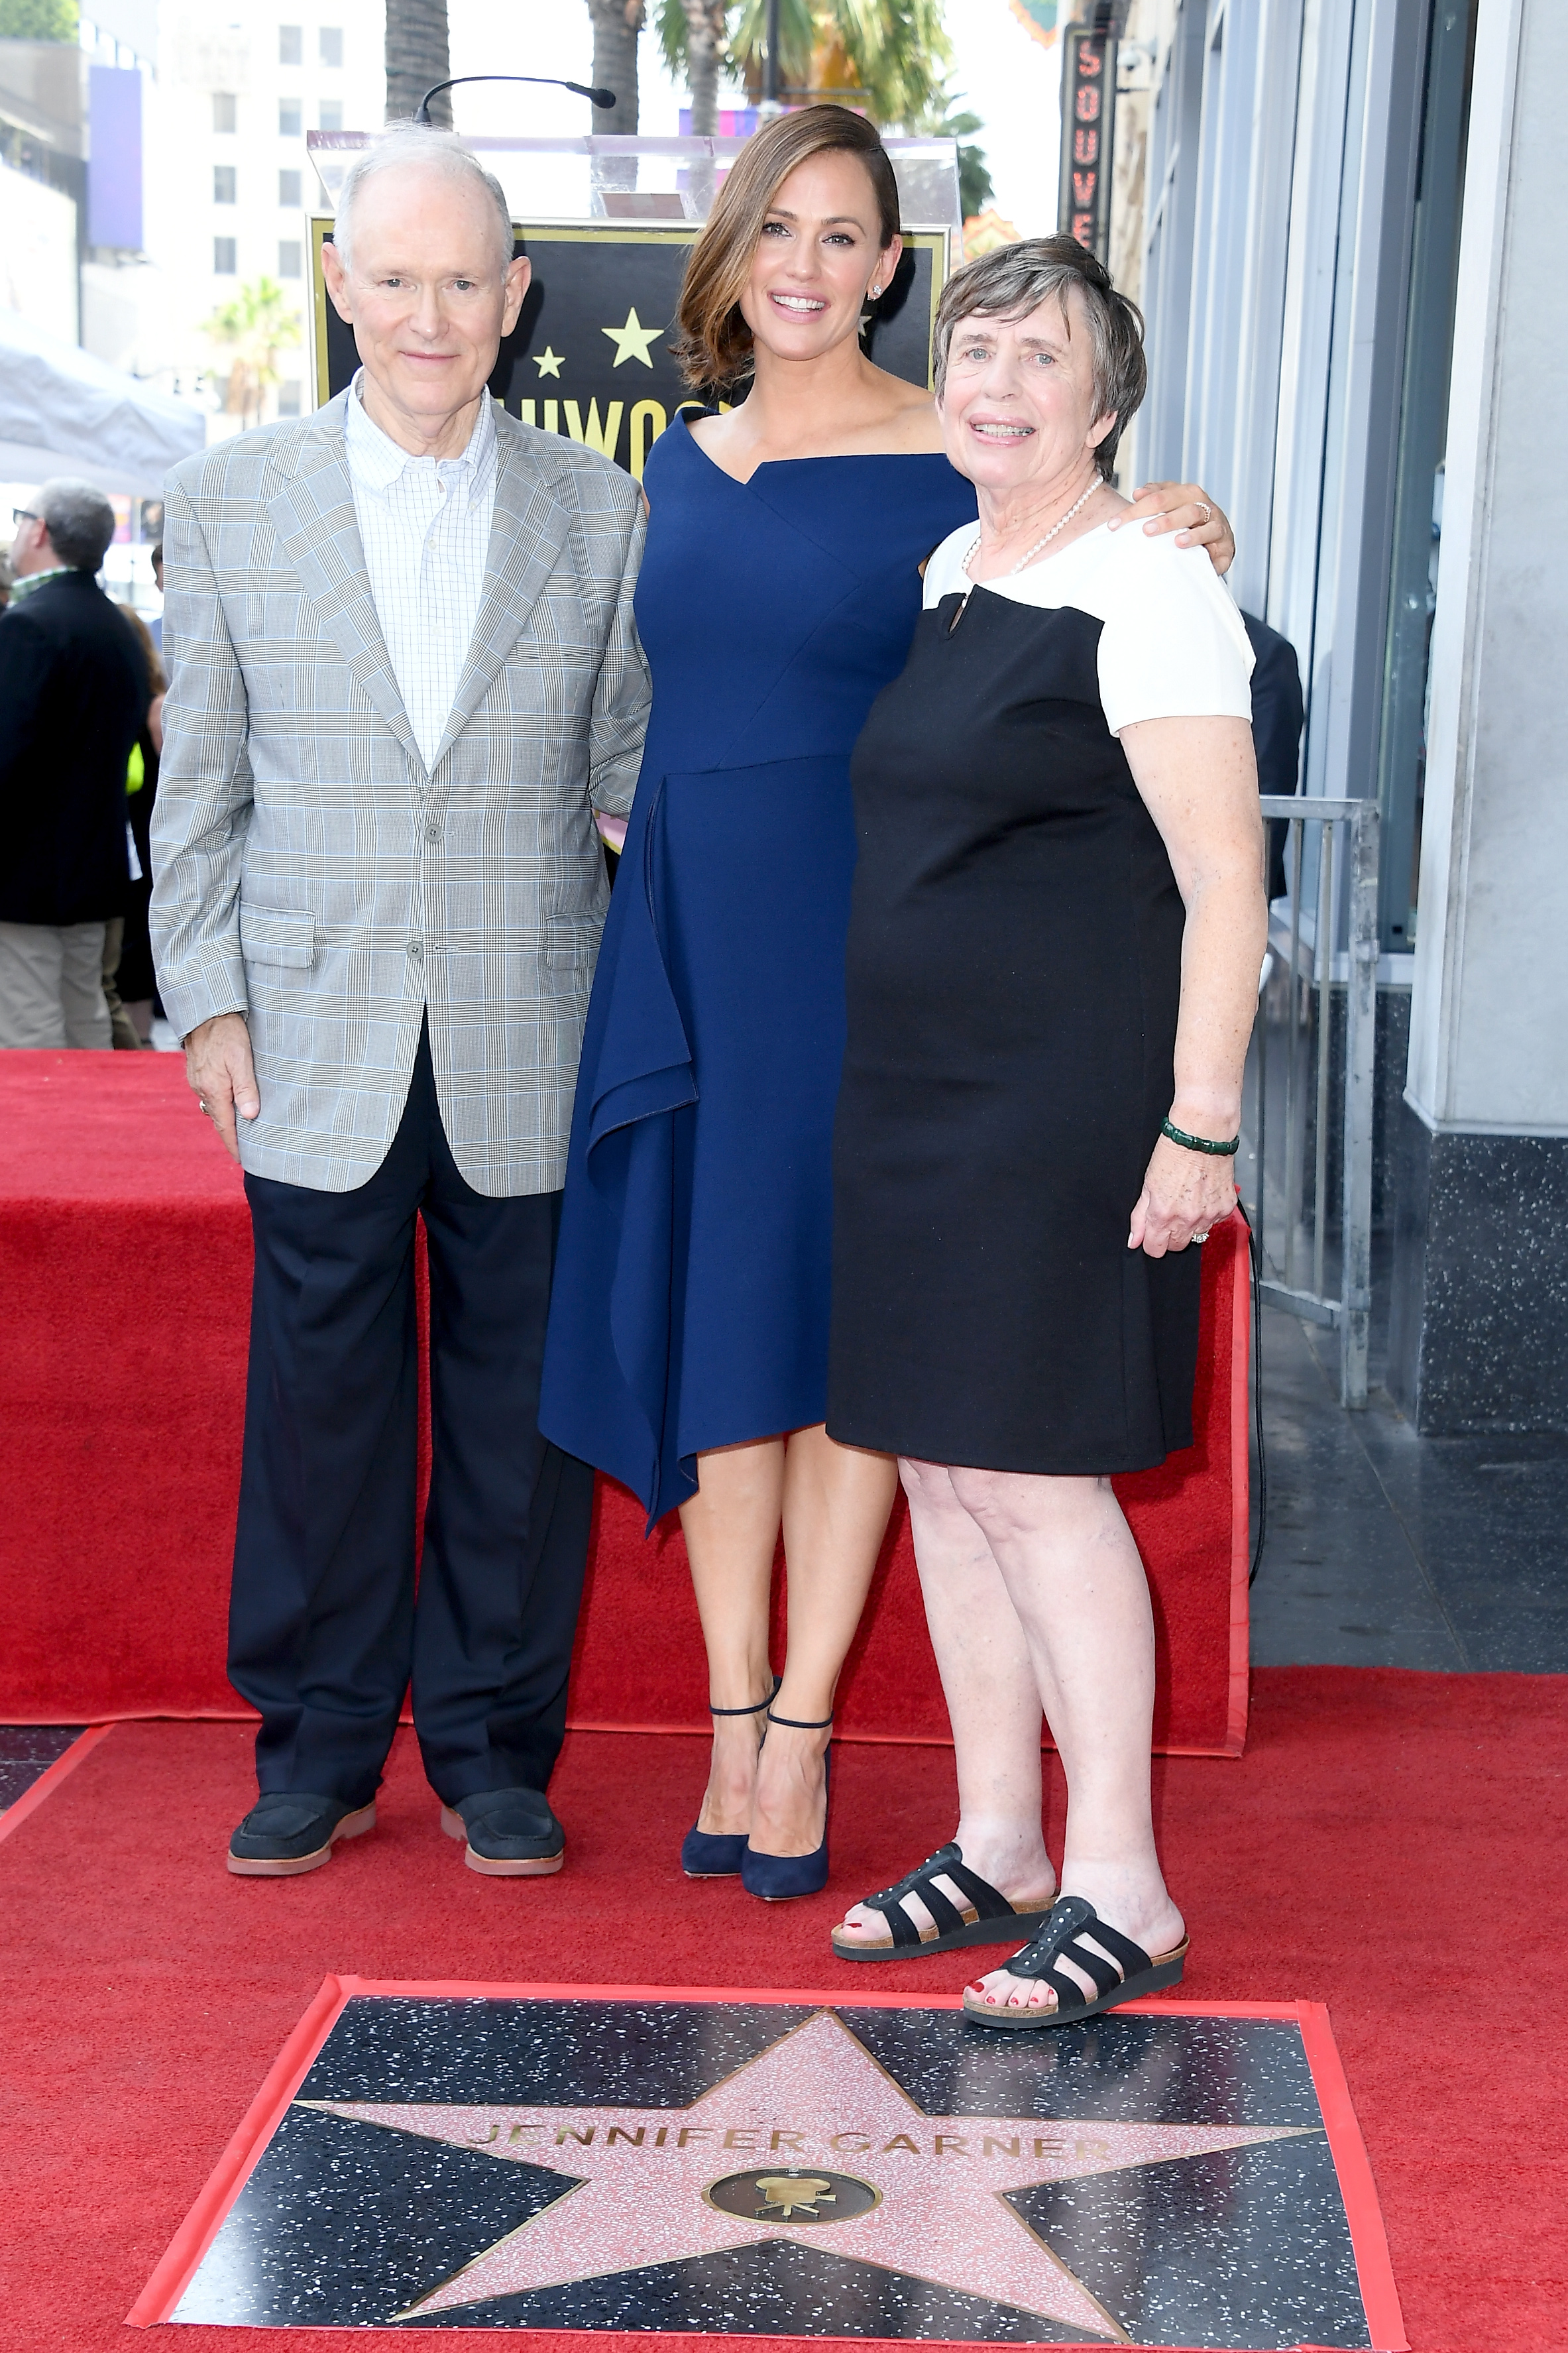 William, Jennifer and Patricia Garner at Jennifer Garner's Hollywood Walk of Fame star ceremony in Hollywood, California on August 20, 2018 | Source: Getty Images